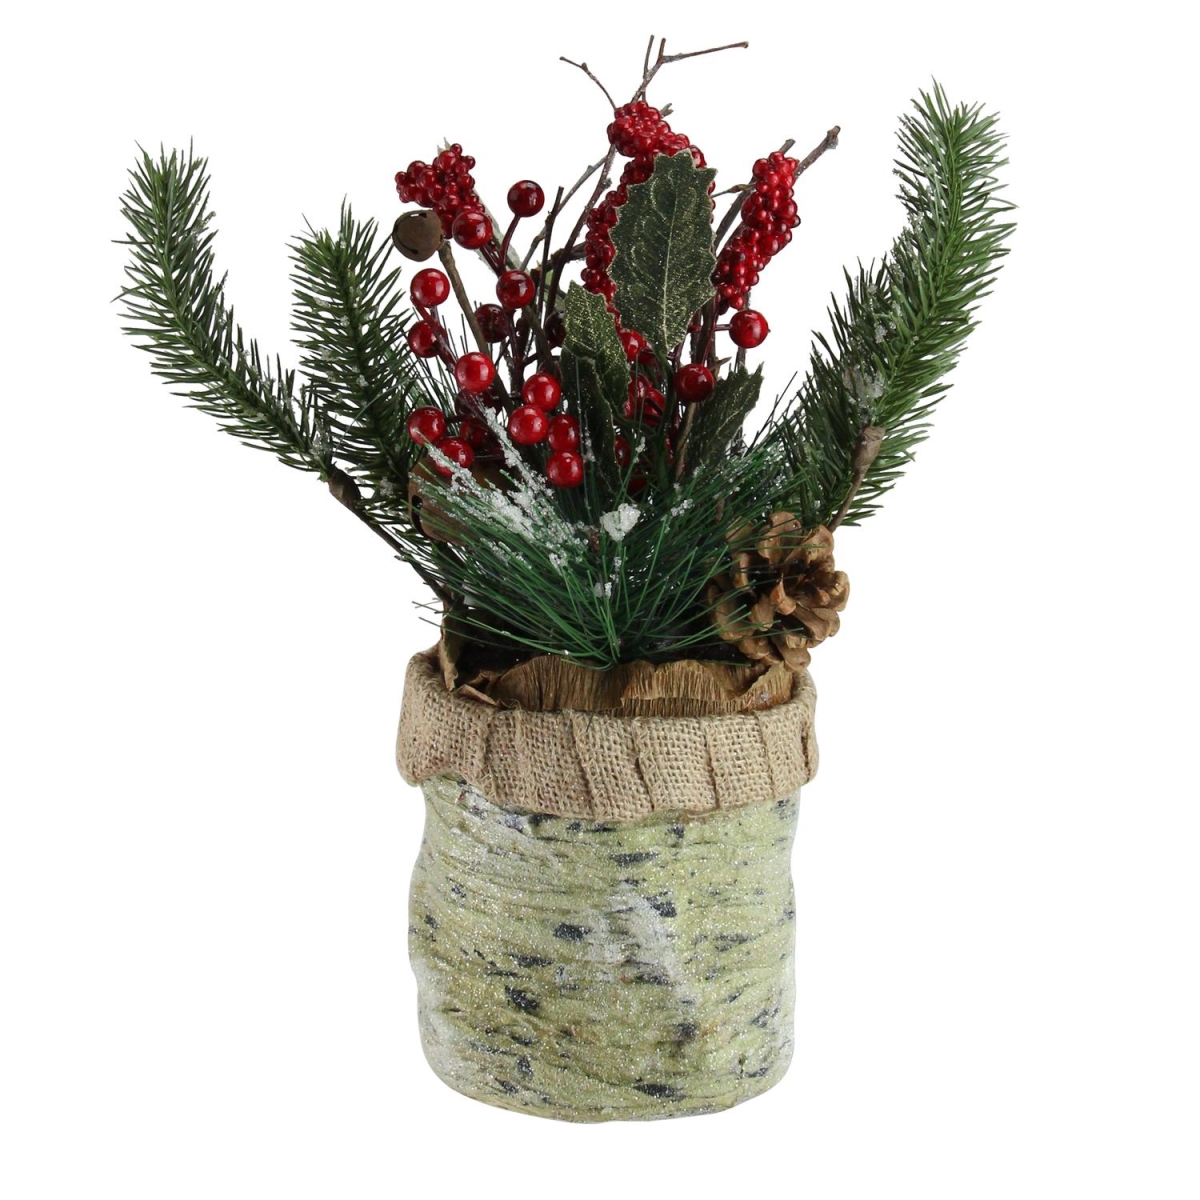 32632713 12 In. Artificial Red Berries Frosted Pine Needles & Twigs Christmas Centerpiece